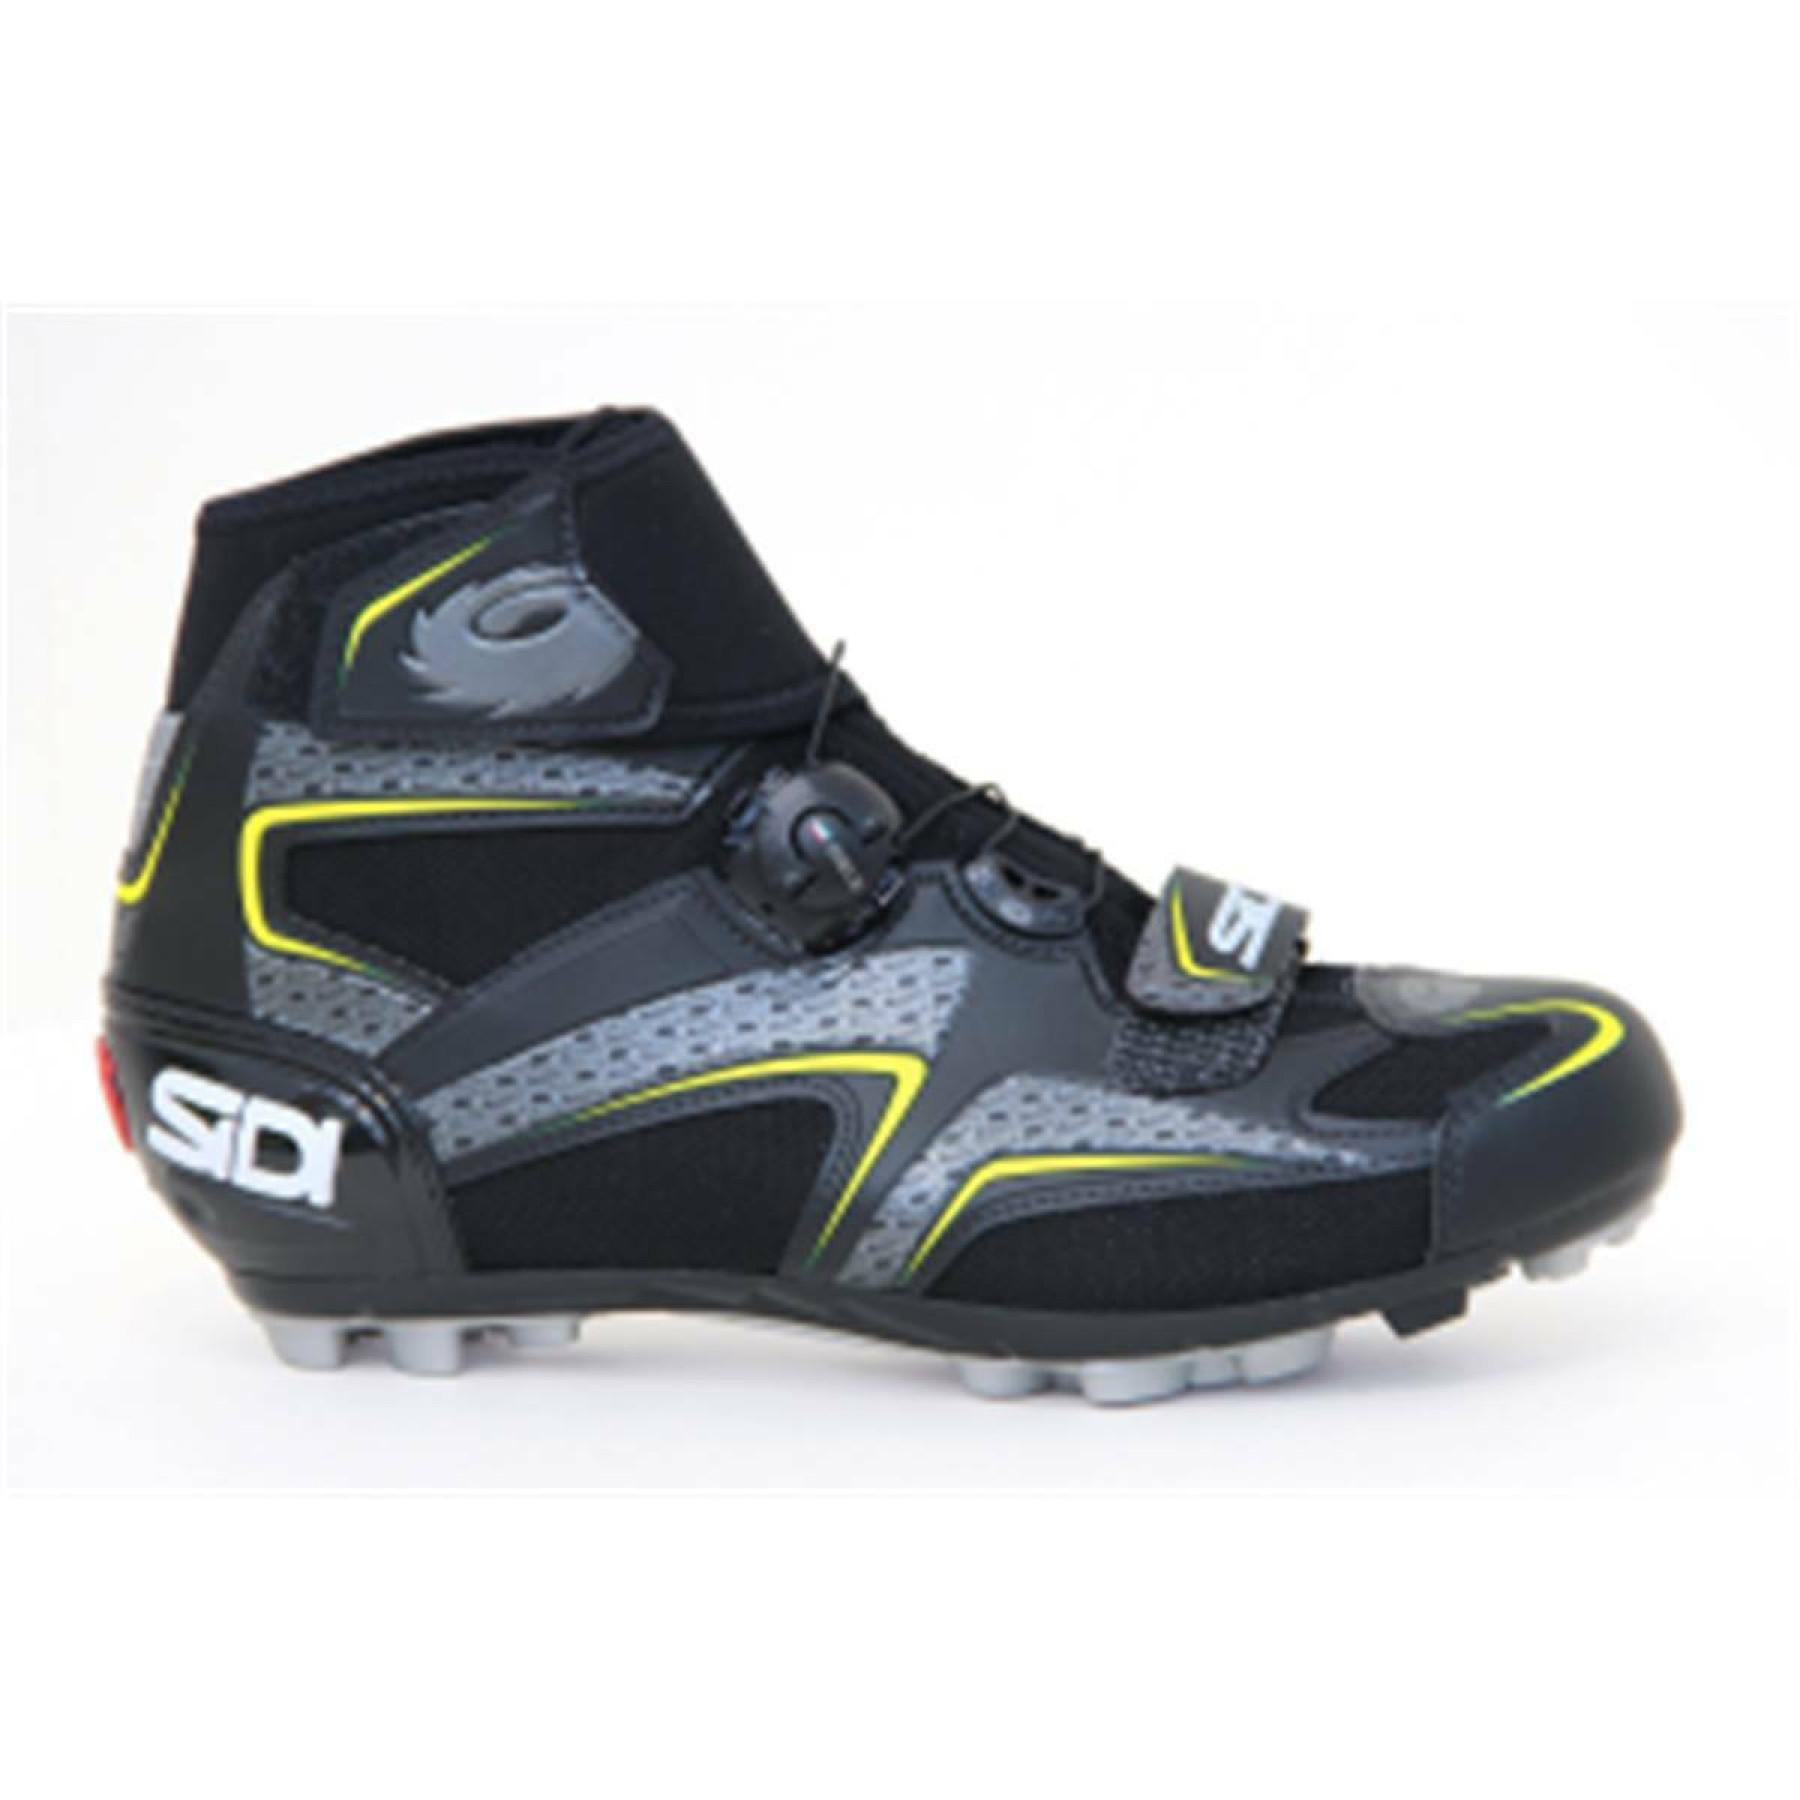 Shoes Sidi Frost gore